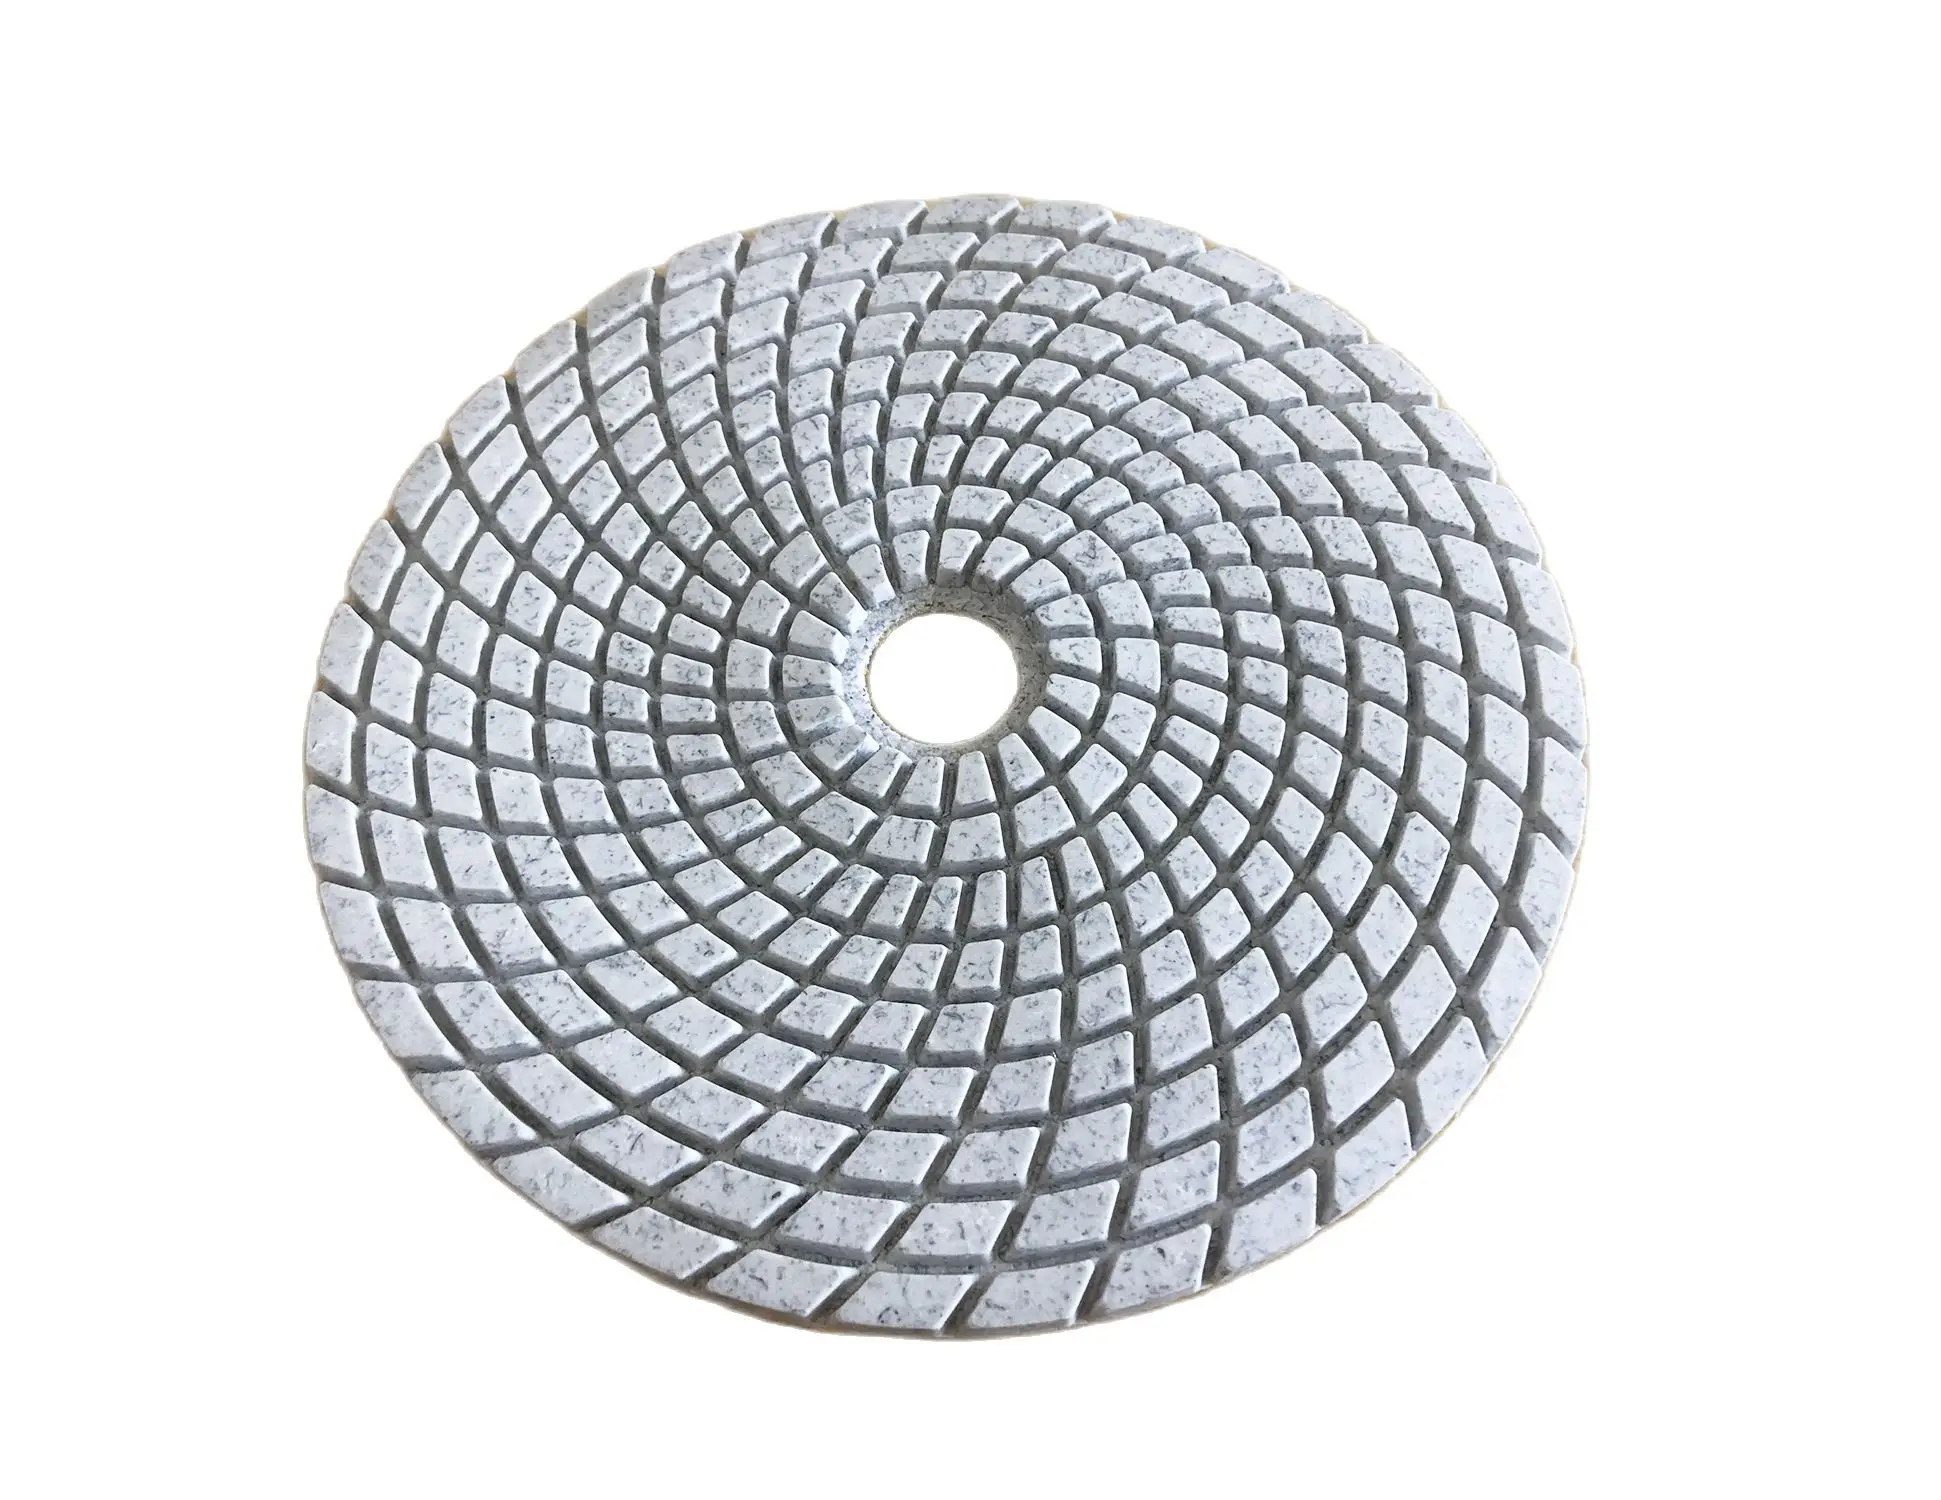 5 Inch 125mm Abrasive Diamond Wet Polishing Pad Grinding Disc For Cleaning And Grinding Granite Stone Concrete Marble